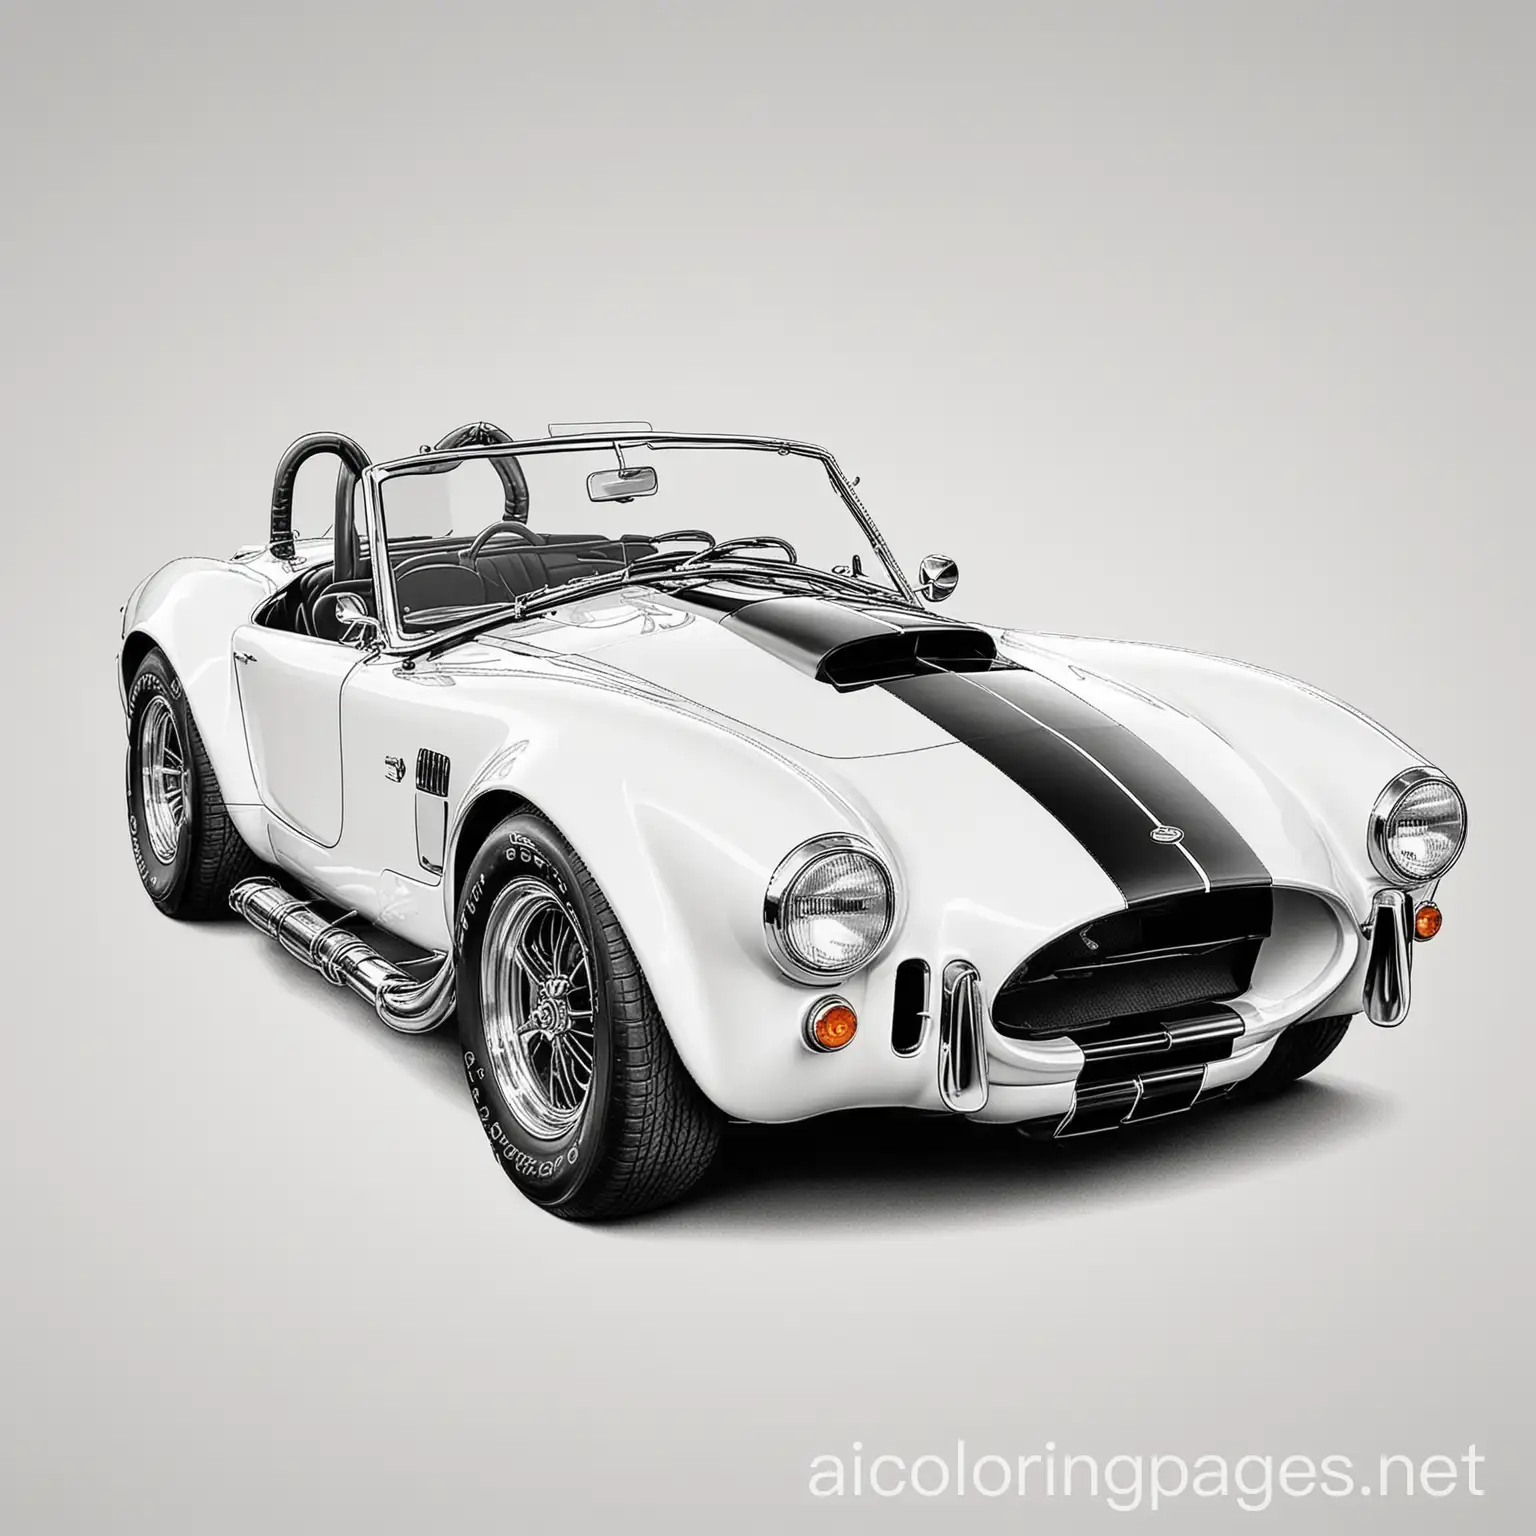 Ford 1965 Cobra, Coloring Page, black and white, line art, white background, Simplicity, Ample White Space. The background of the coloring page is plain white to make it easy for young children to color within the lines. The outlines of all the subjects are easy to distinguish, making it simple for kids to color without too much difficulty